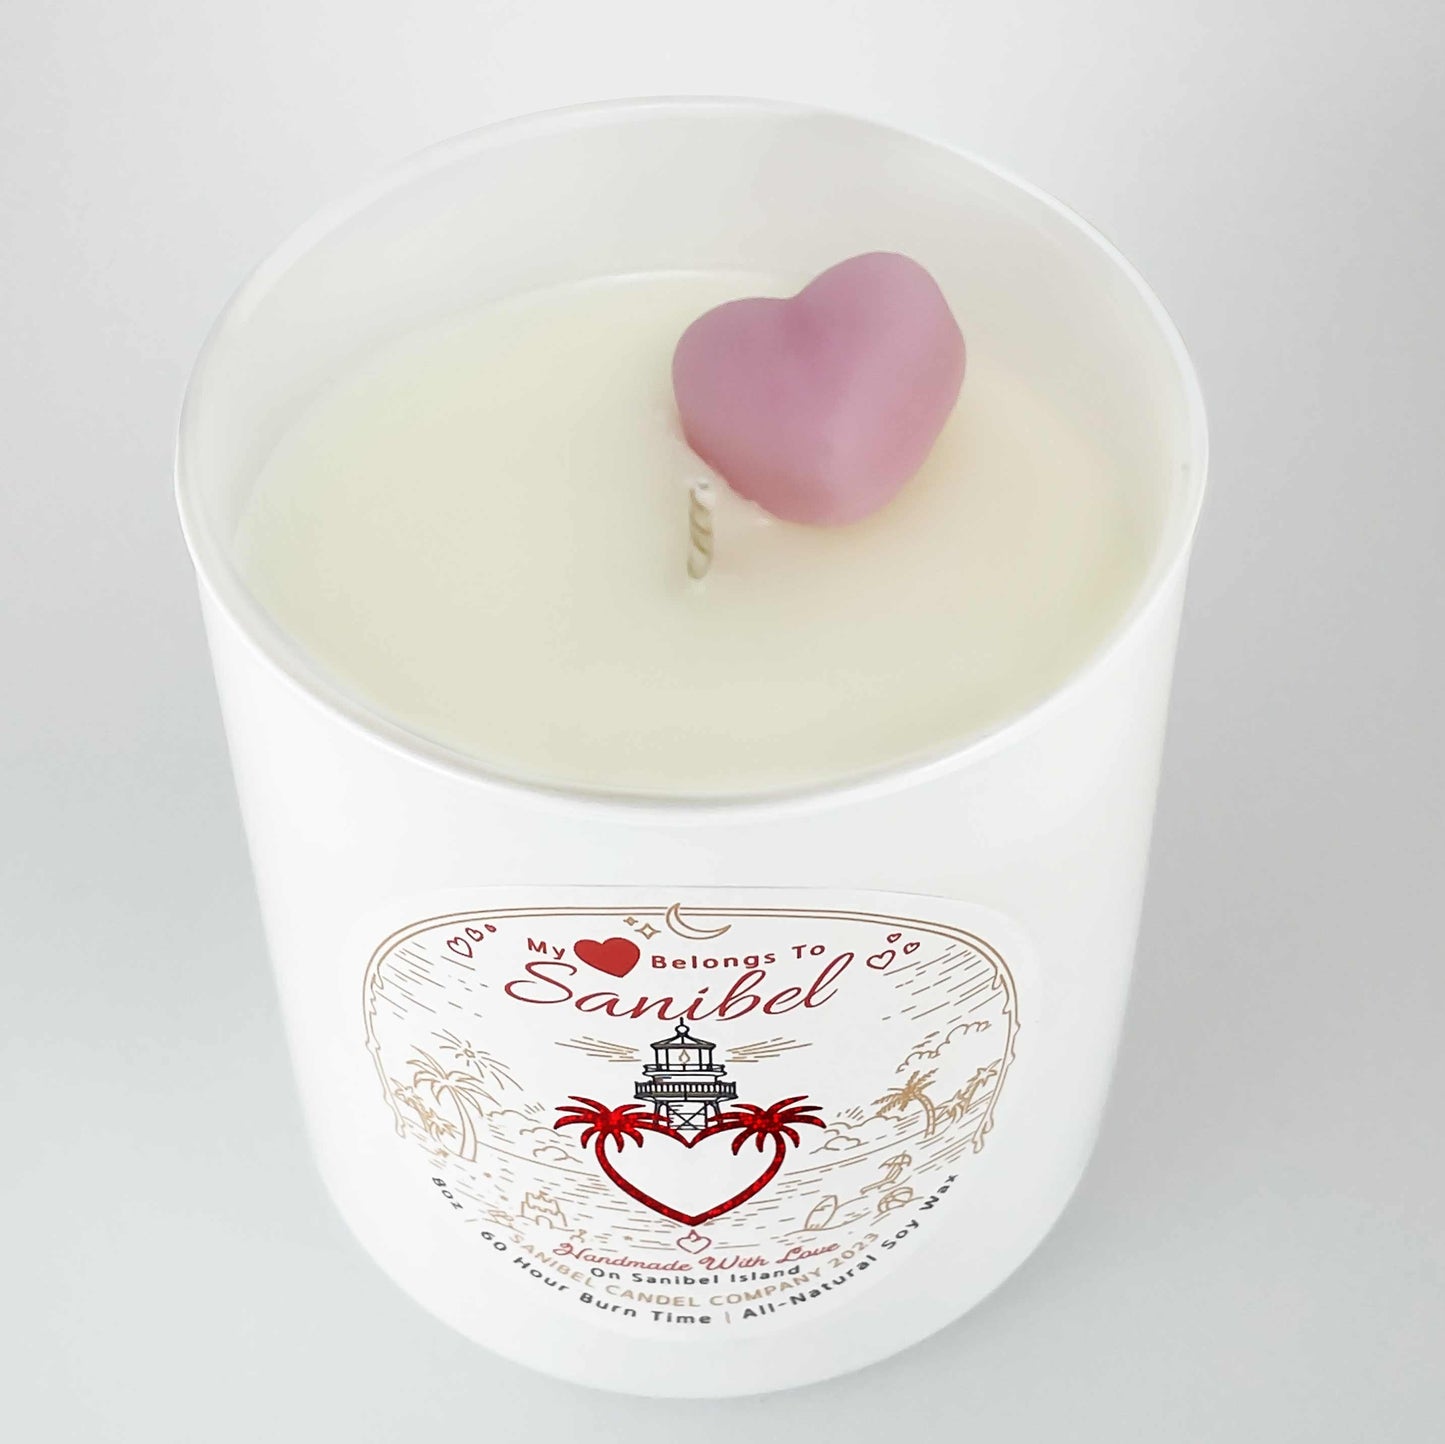 My Heart Belongs To Sanibel - Valentine's Day Candle - 8 oz